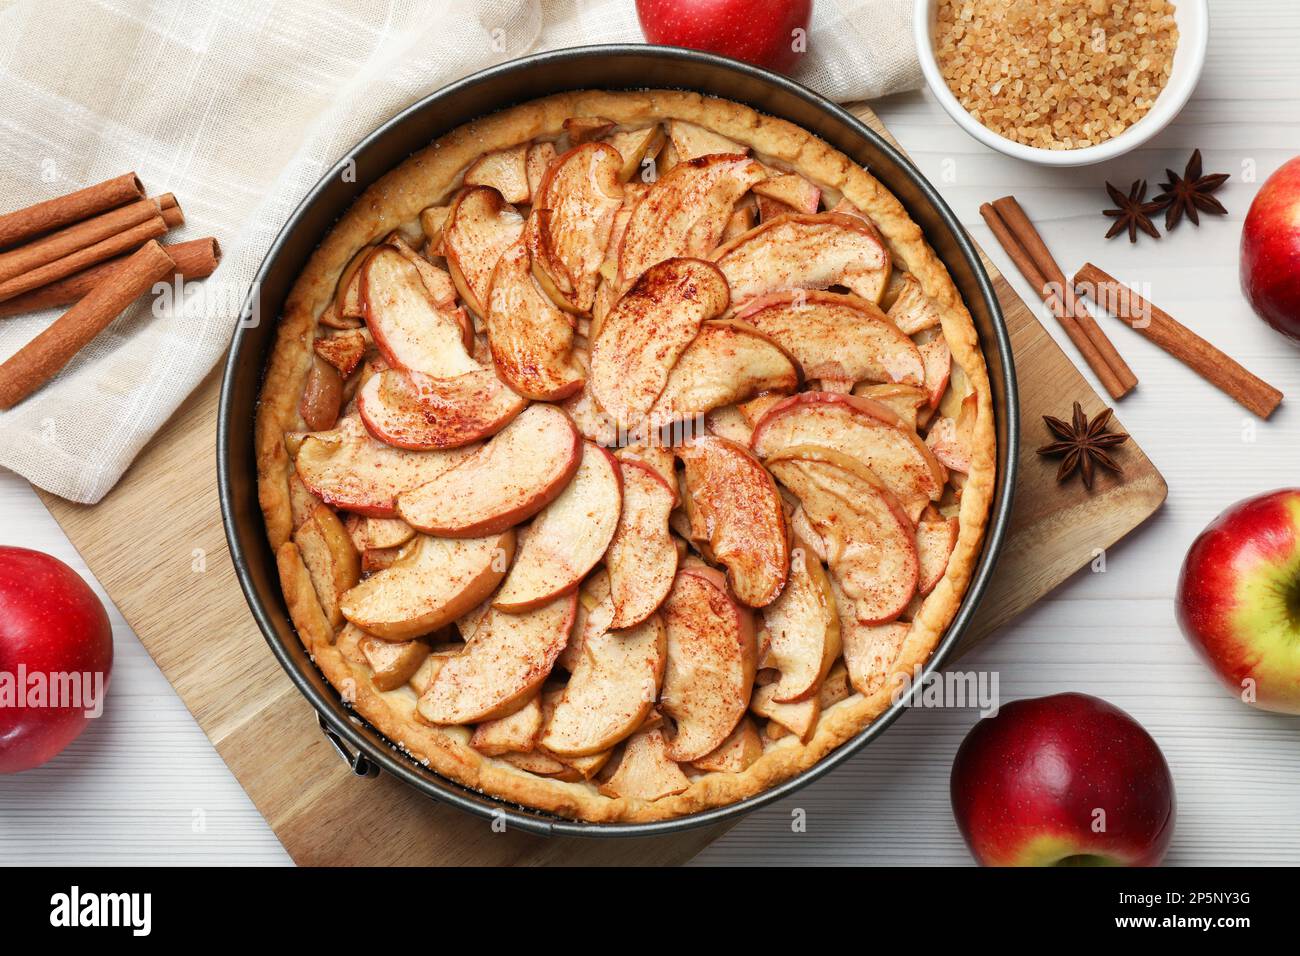 Delicious apple pie and ingredients on white wooden table, flat lay Stock Photo